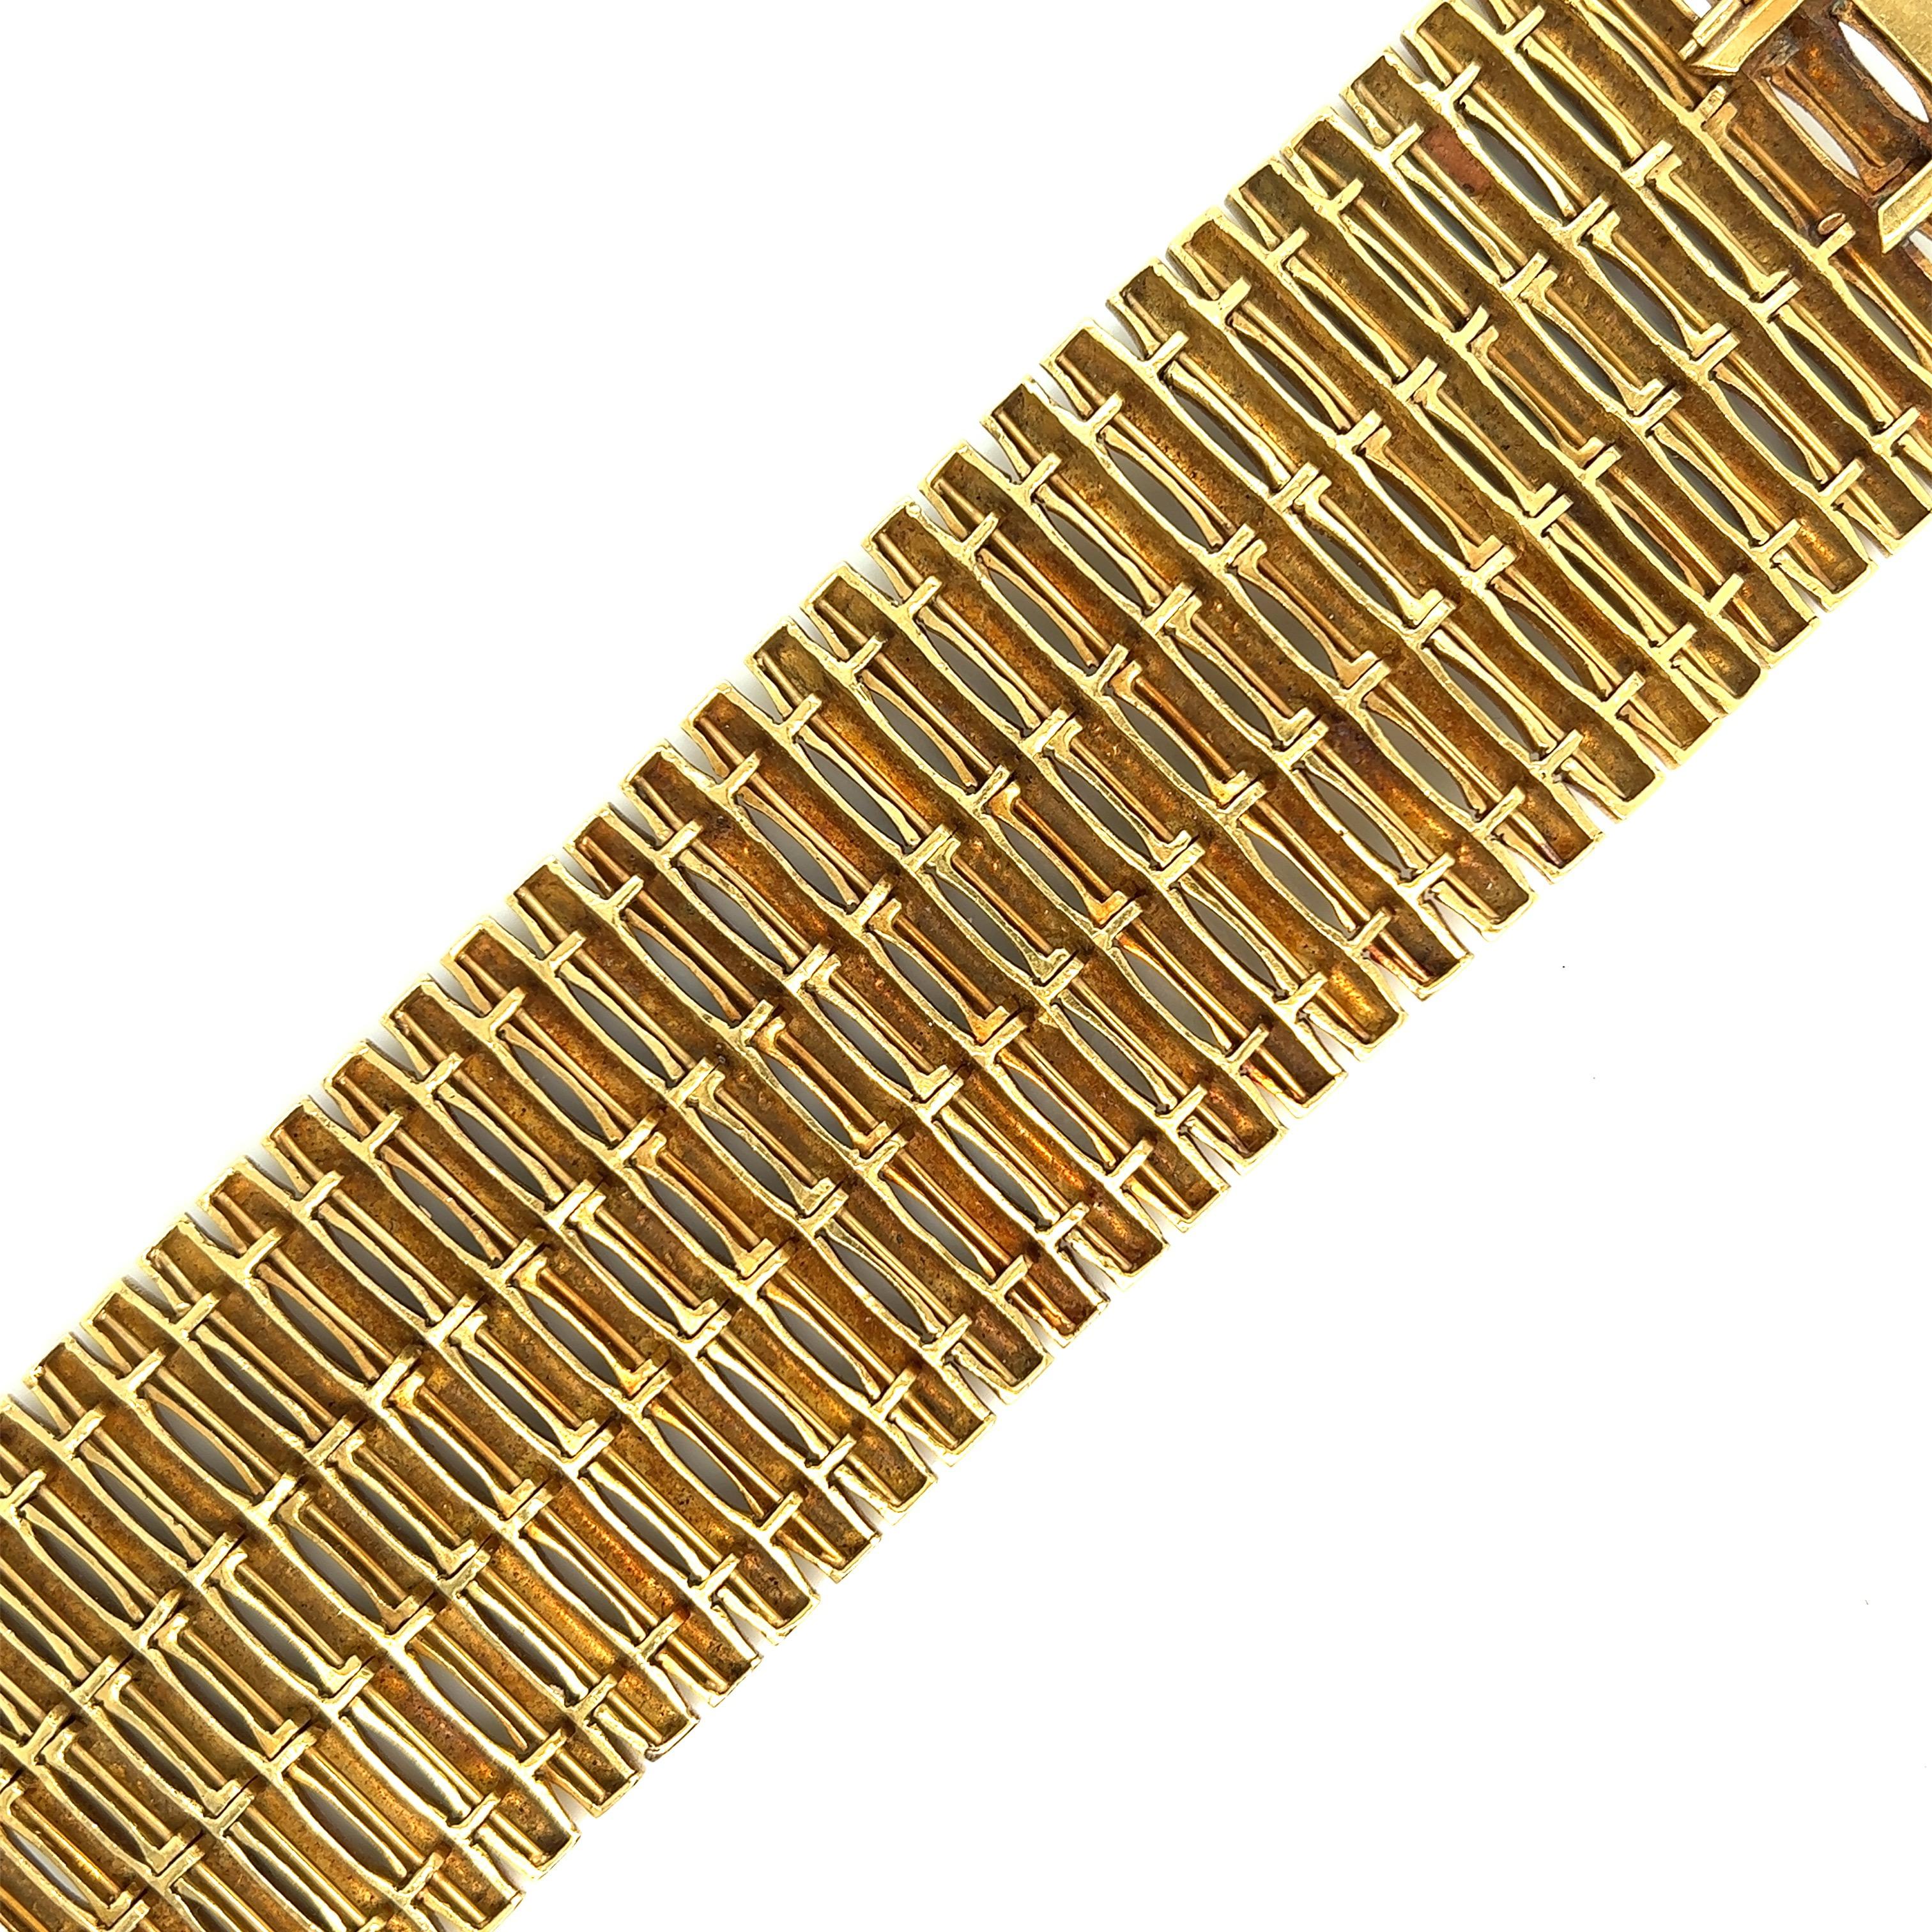 Bamboo yellow gold bracelet 

18 karat yellow gold bracelet with bamboo motif; marked 18kt

Size: width 1.75 inches, length 6.75 inches
Total weight: 154.1 grams